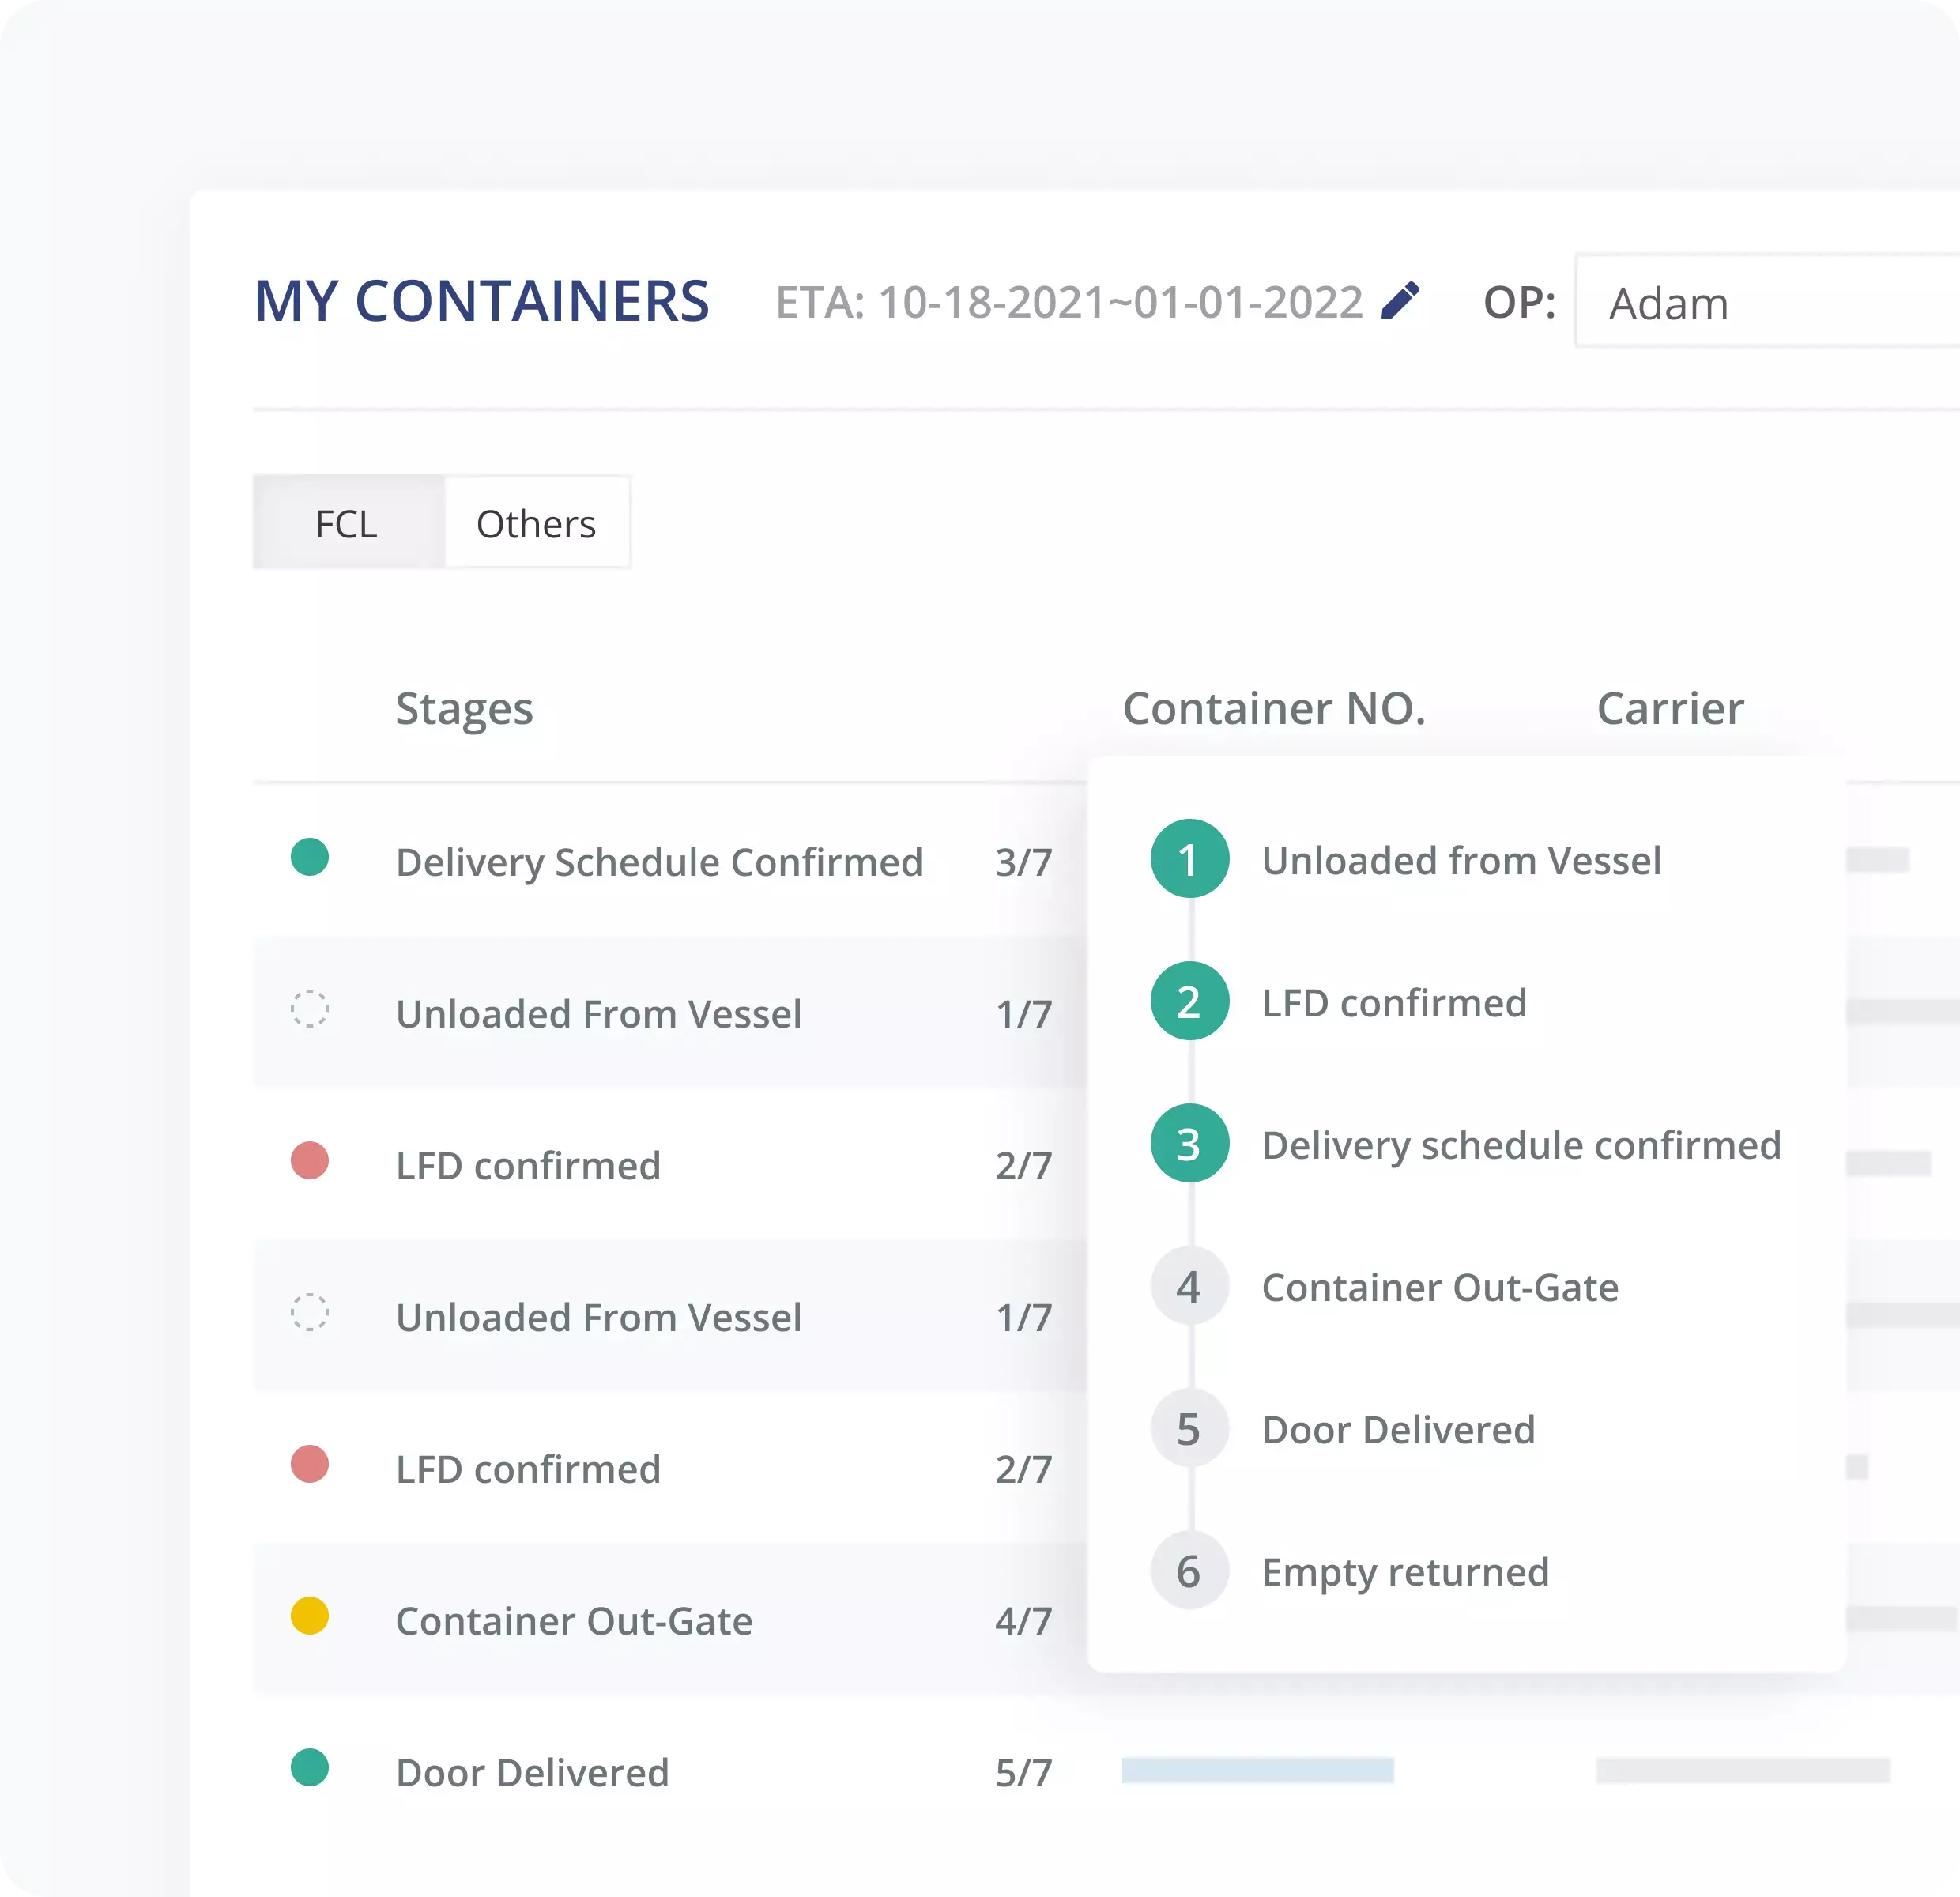 GoFreight’s container tracking system listing current containers in various stages of the delivery process.